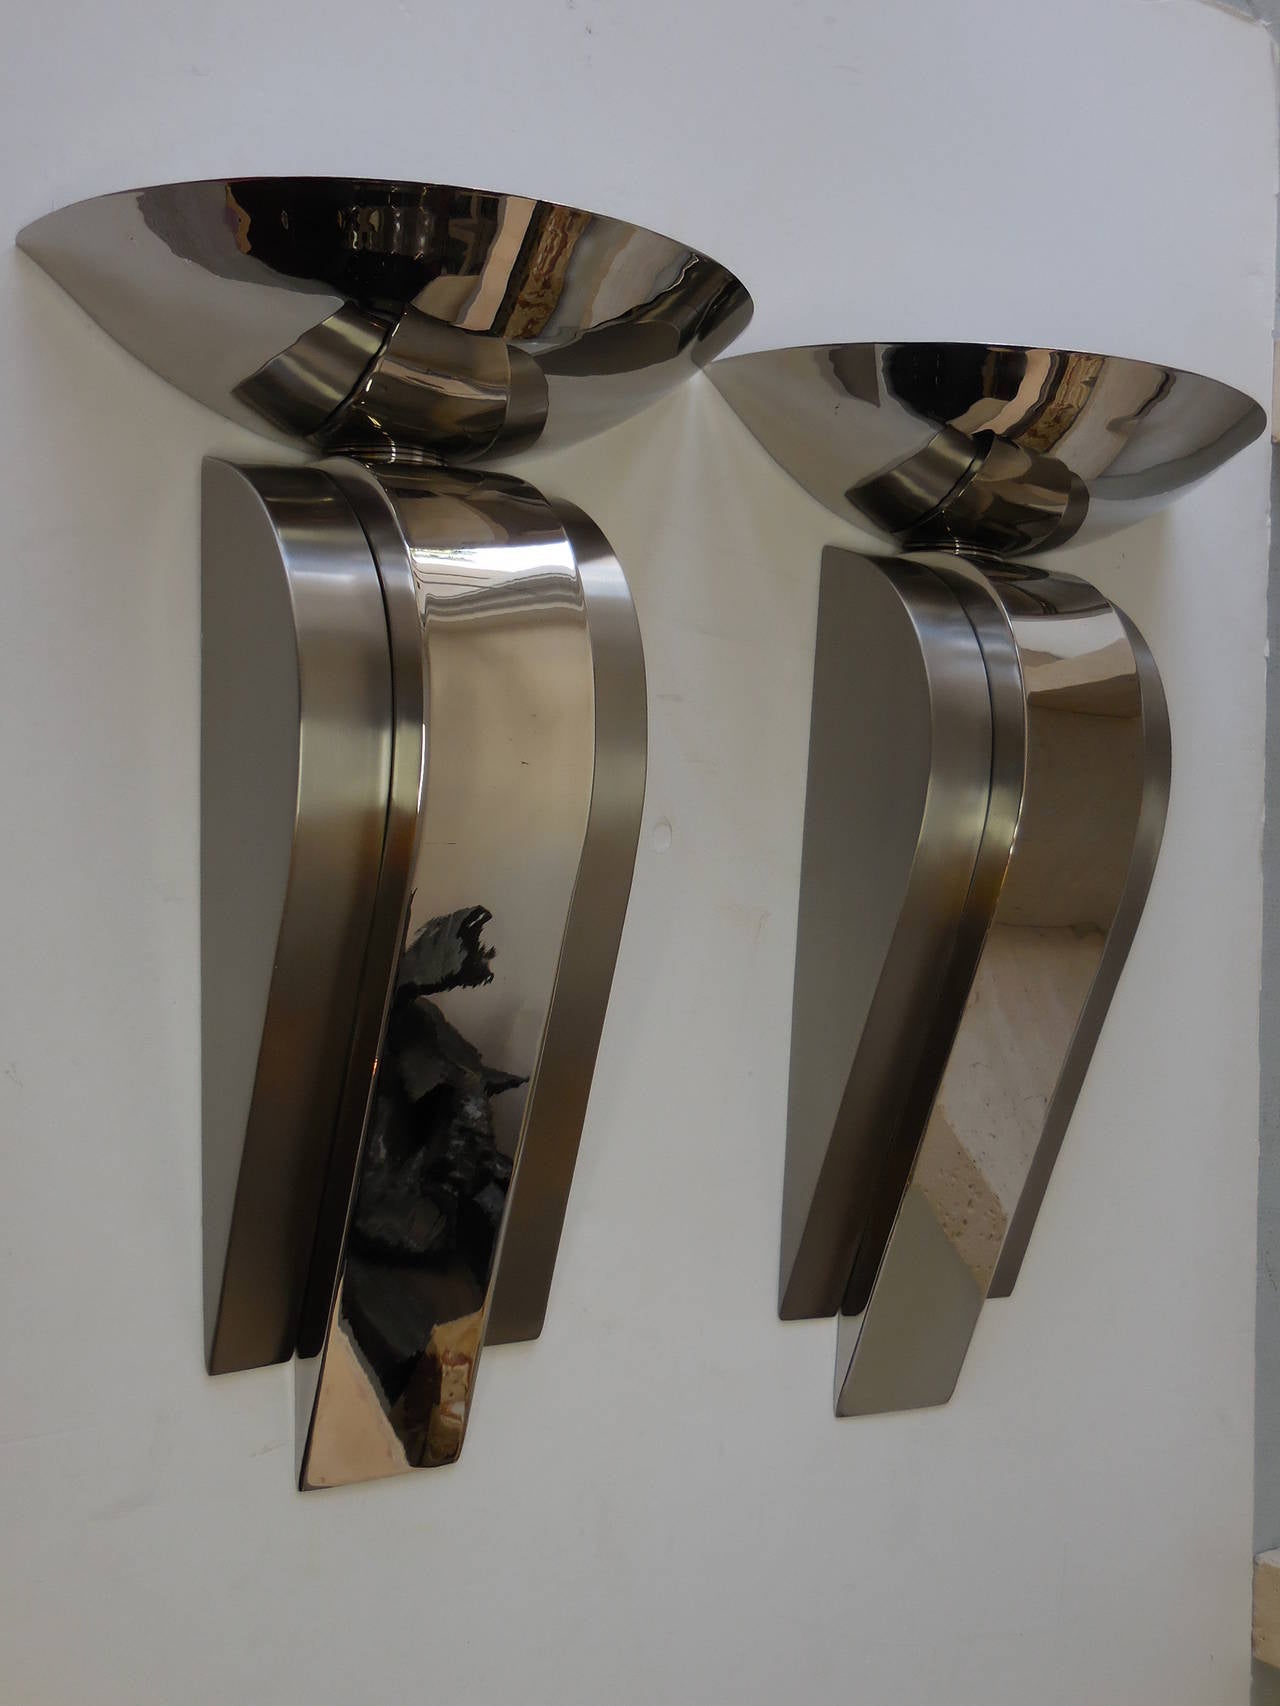 A pair of large stainless steel sconces. Highly polished with brushed areas. Flawless execution with nice detail, note the subtle flaring of the disk.